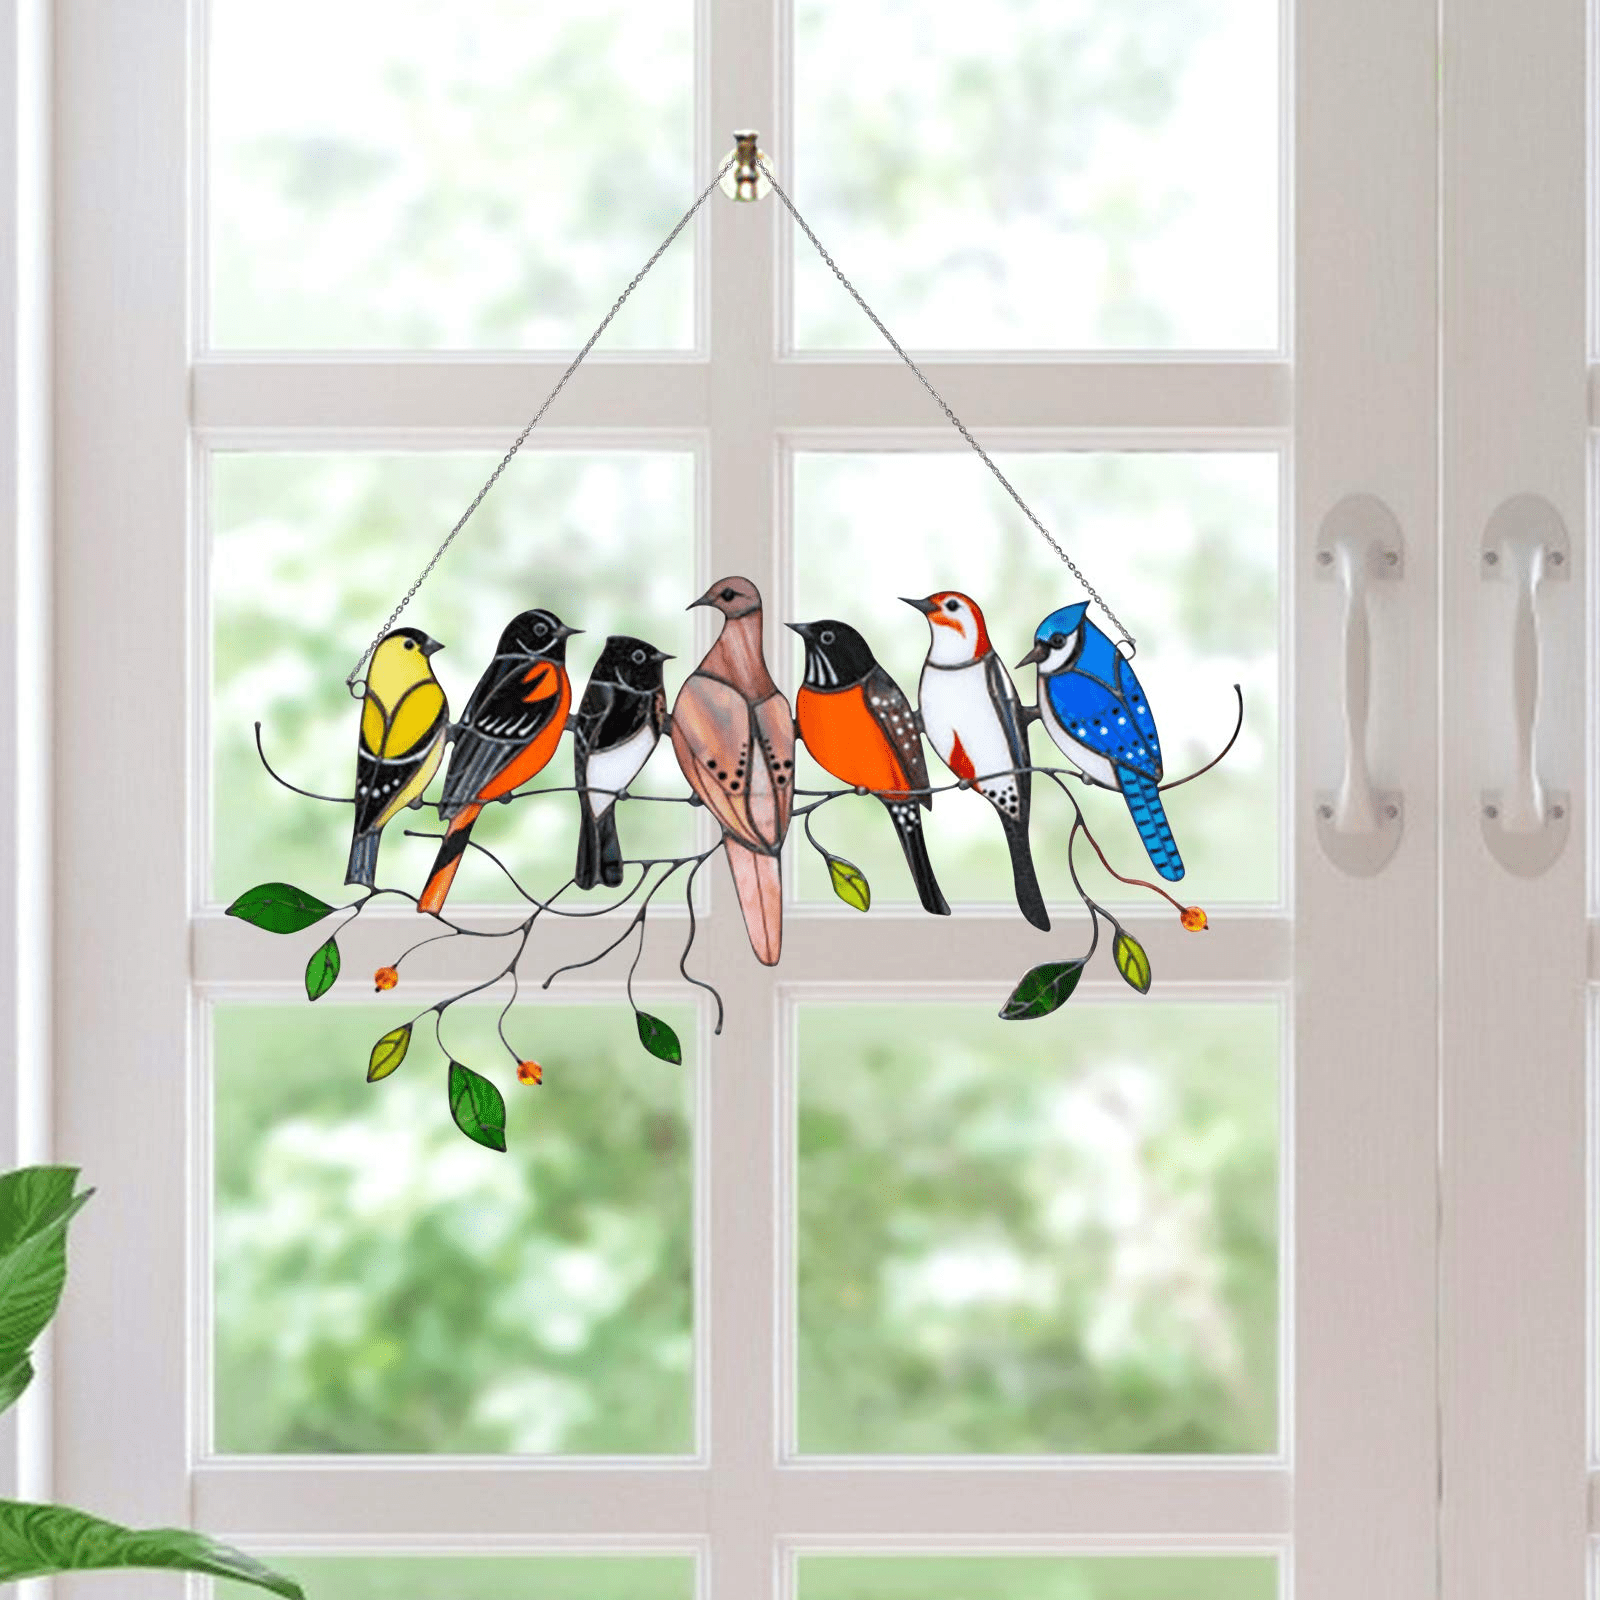 Ornament Memorial Handicrafts Gifts Hanging for Windows Doors Acrylic-4 Birds Window Stained Panel Decoration SHUAIGUO Birds on a Wire Stained Glass Window Hangings Ornament Home Decor